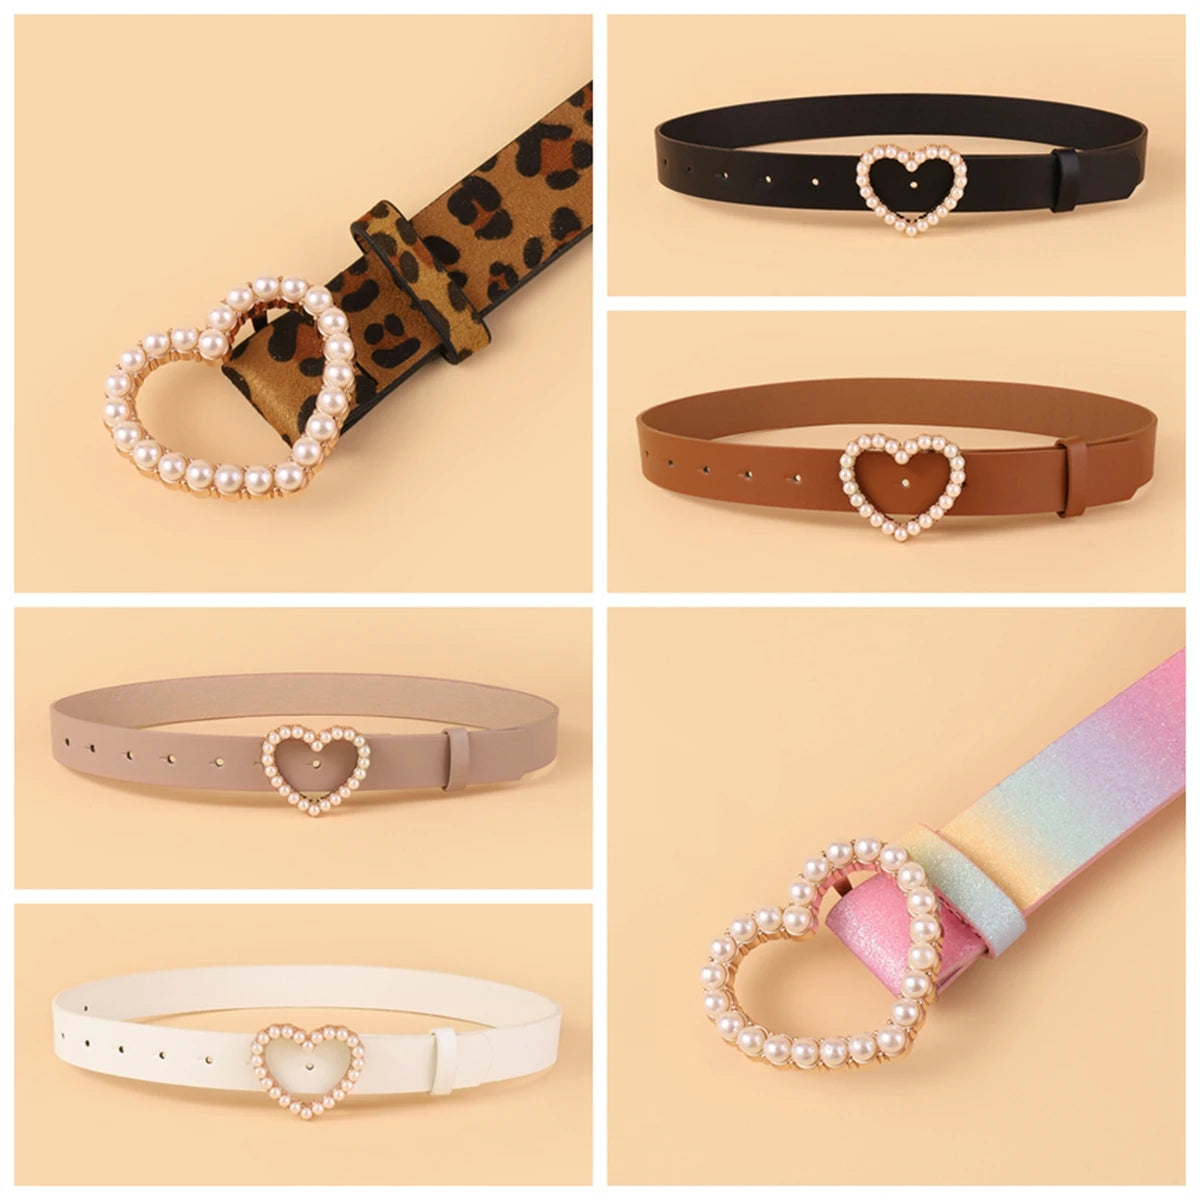 Pearl Hearts Vegan Leather Womens Belt | Hypoallergenic - Allergy Friendly - Naturally Free